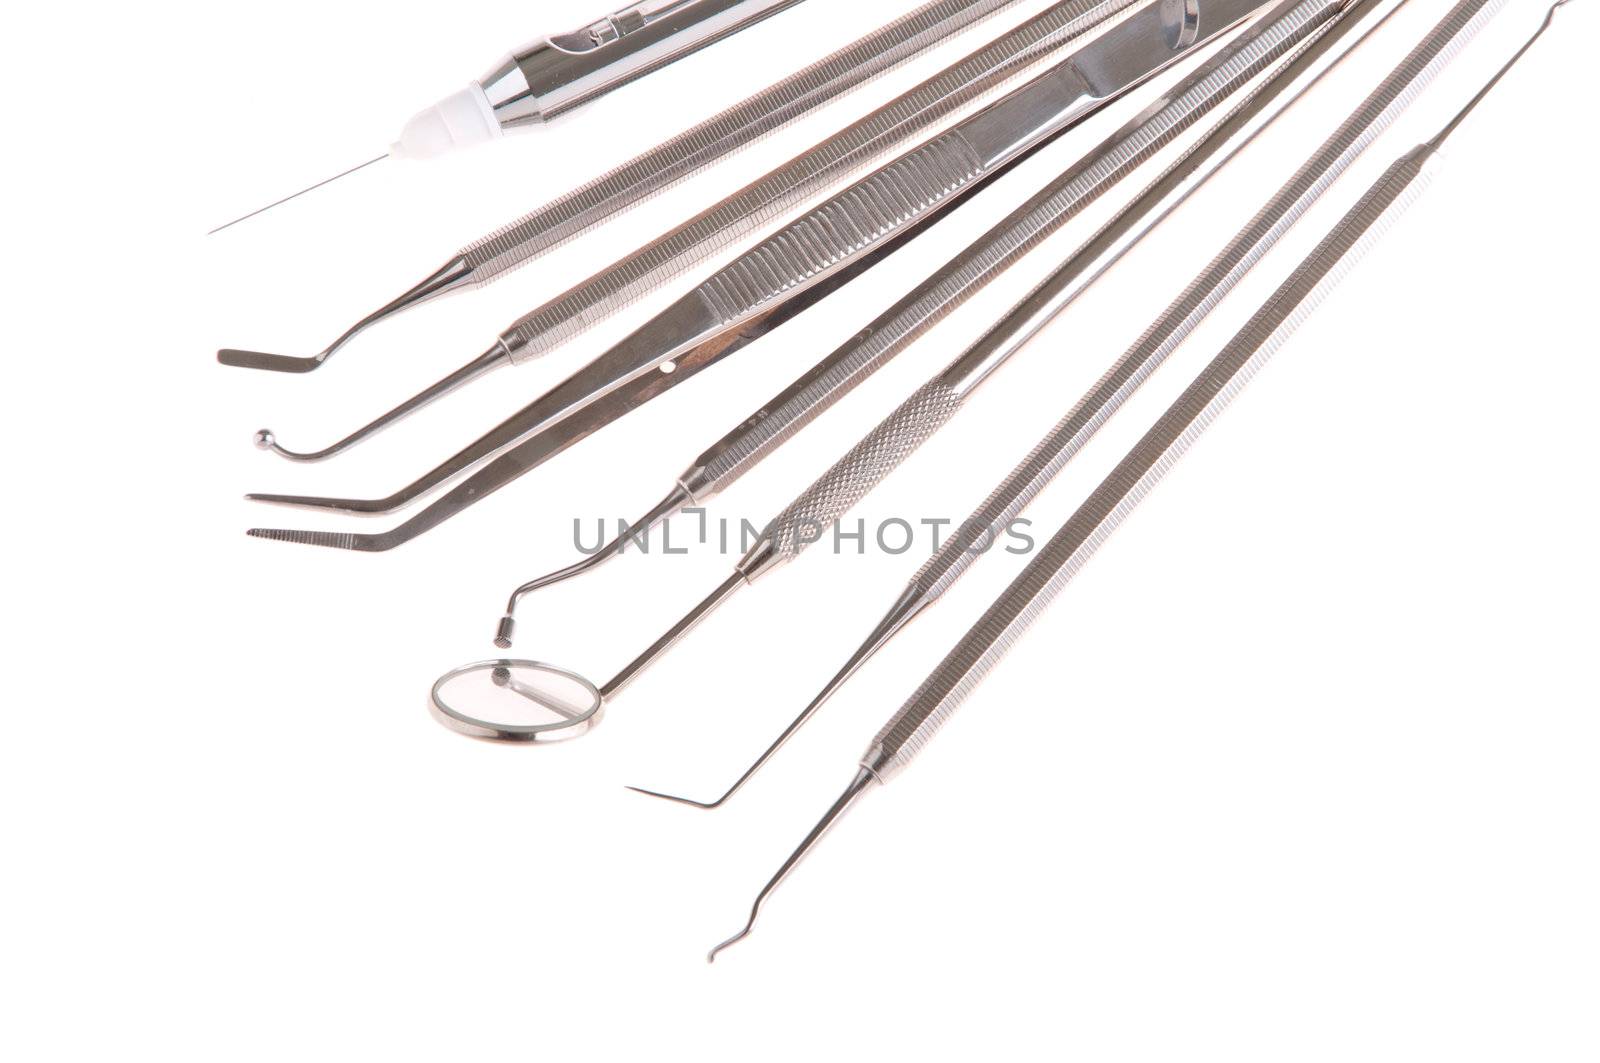 stainless steel dental surgery instruments for teeth care (isolated on white background)